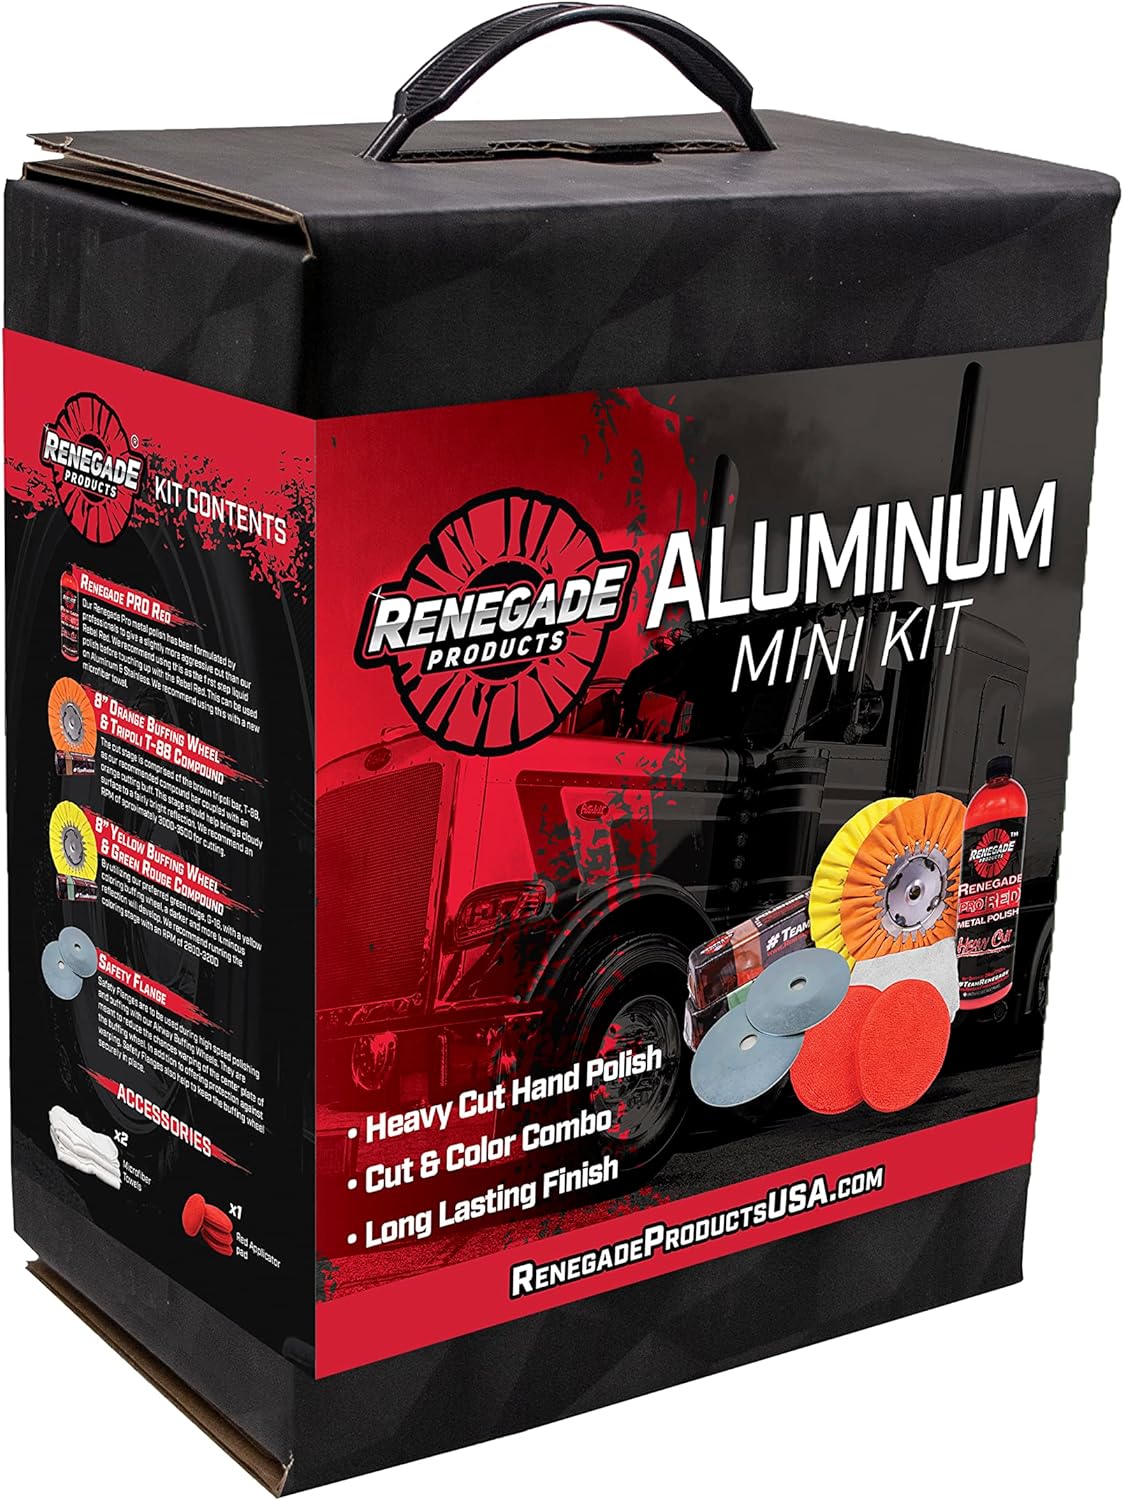 Renegade Products USA Renegade Products Aluminum Polishing Mini Kit Complete with Buffing Wheels, Buffing Compounds, Right Angle Grinder Safety Flang